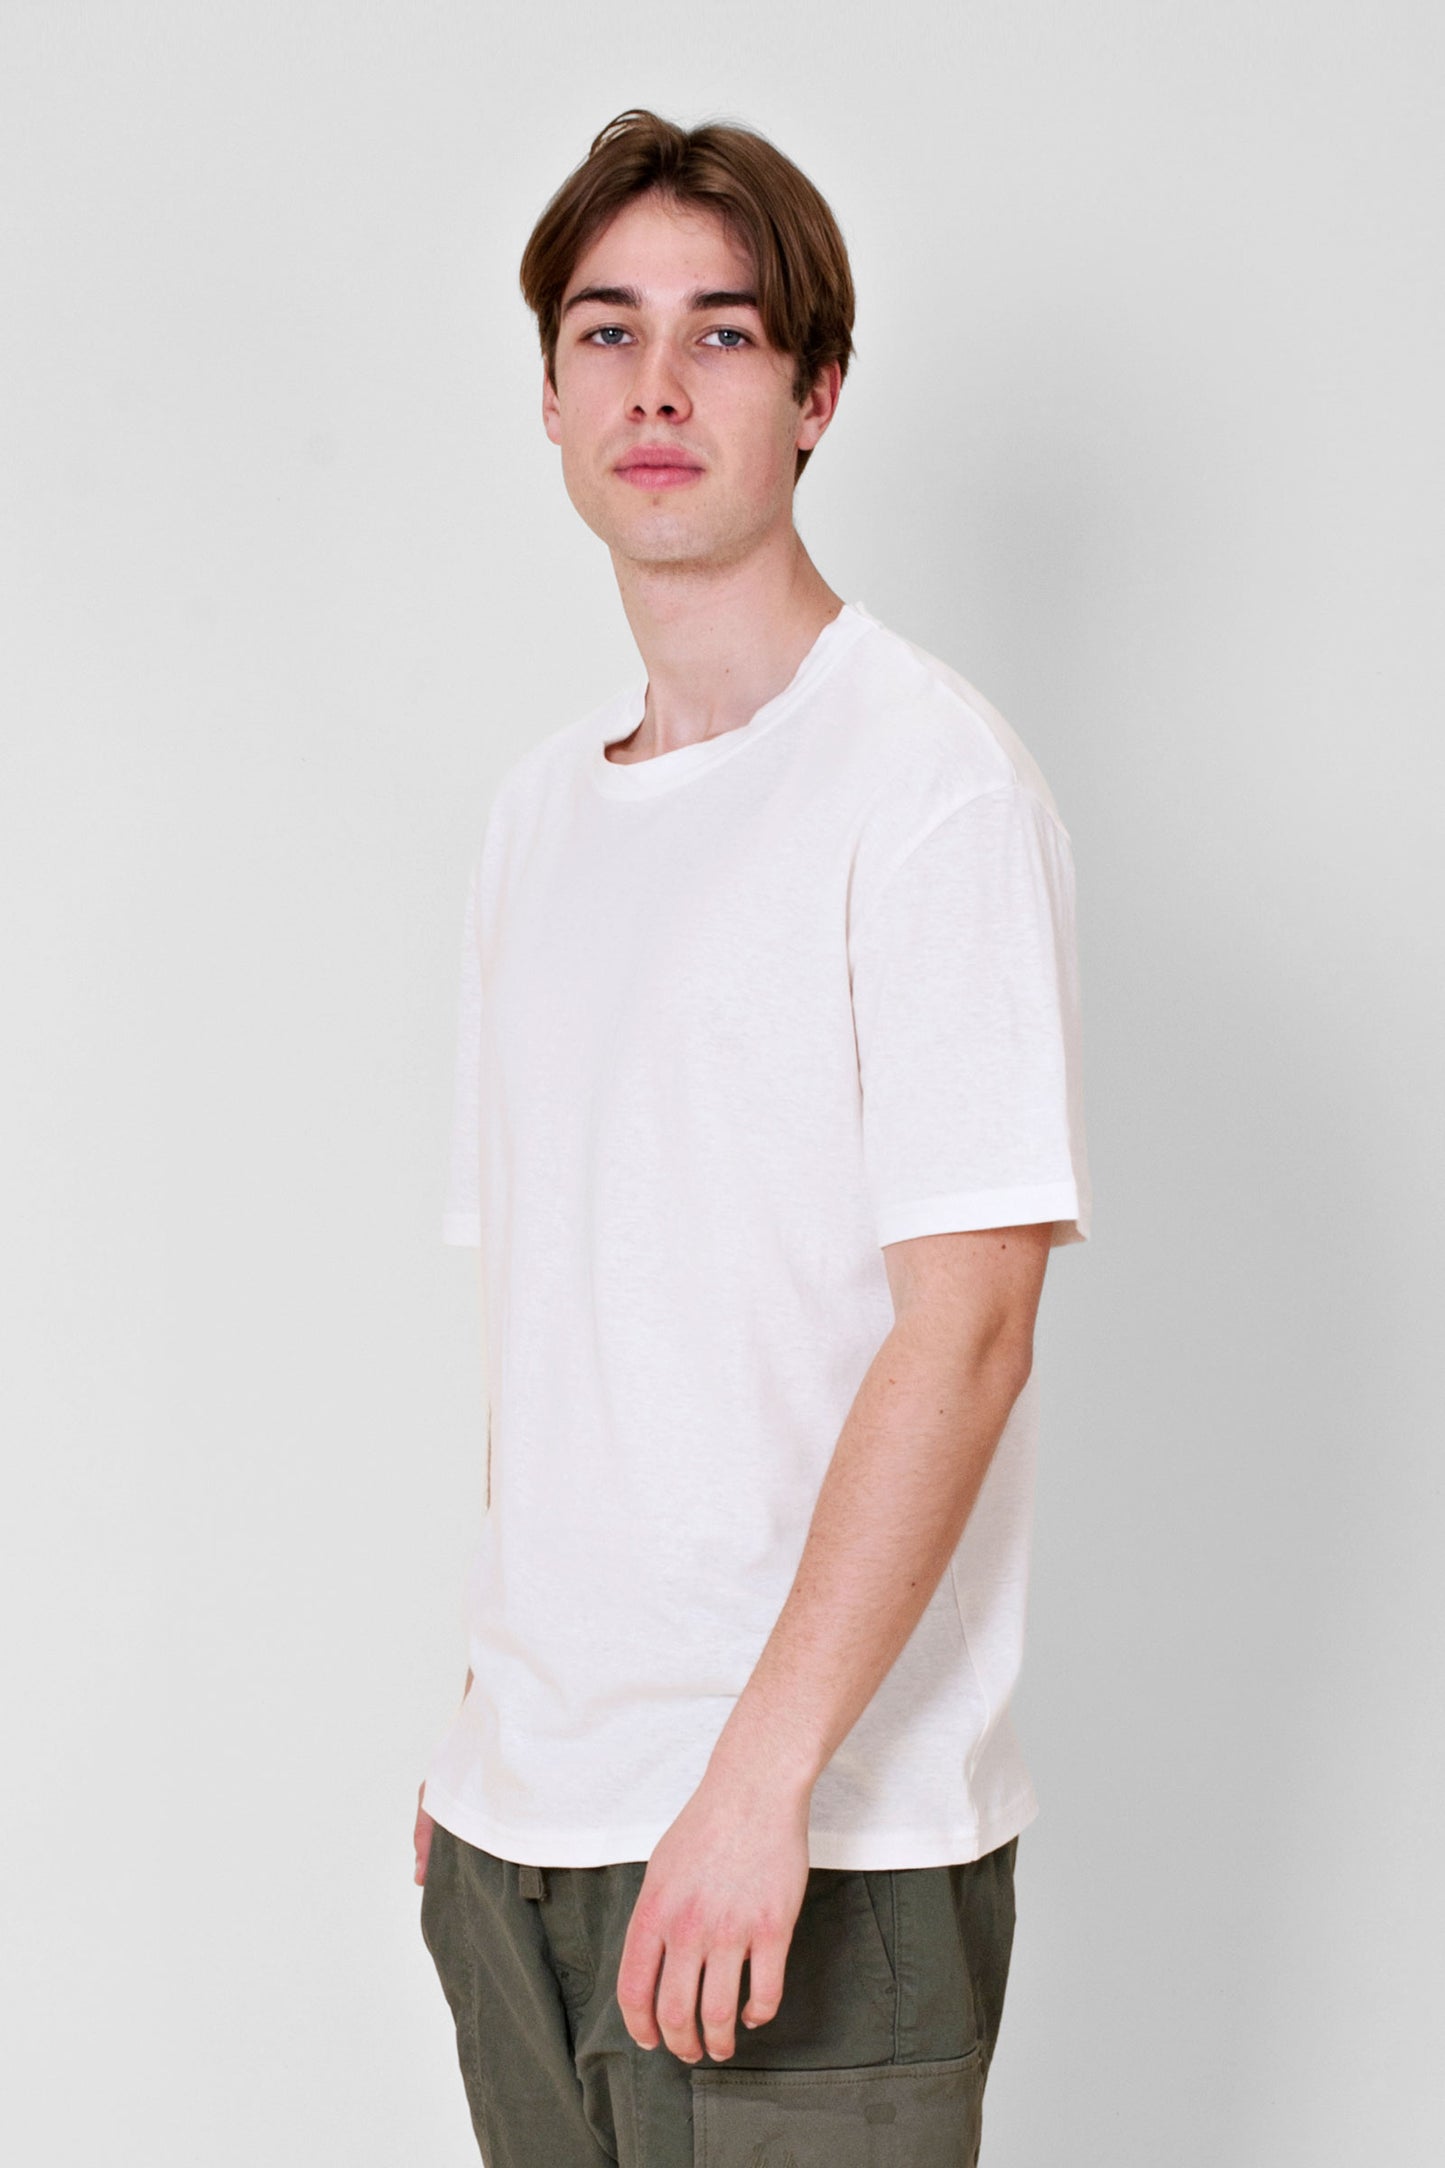 Made from a smooth lightweight hemp and organic cotton jersey, this is the perfect summer t-shirt. It has a beautiful drape and is very breathable.